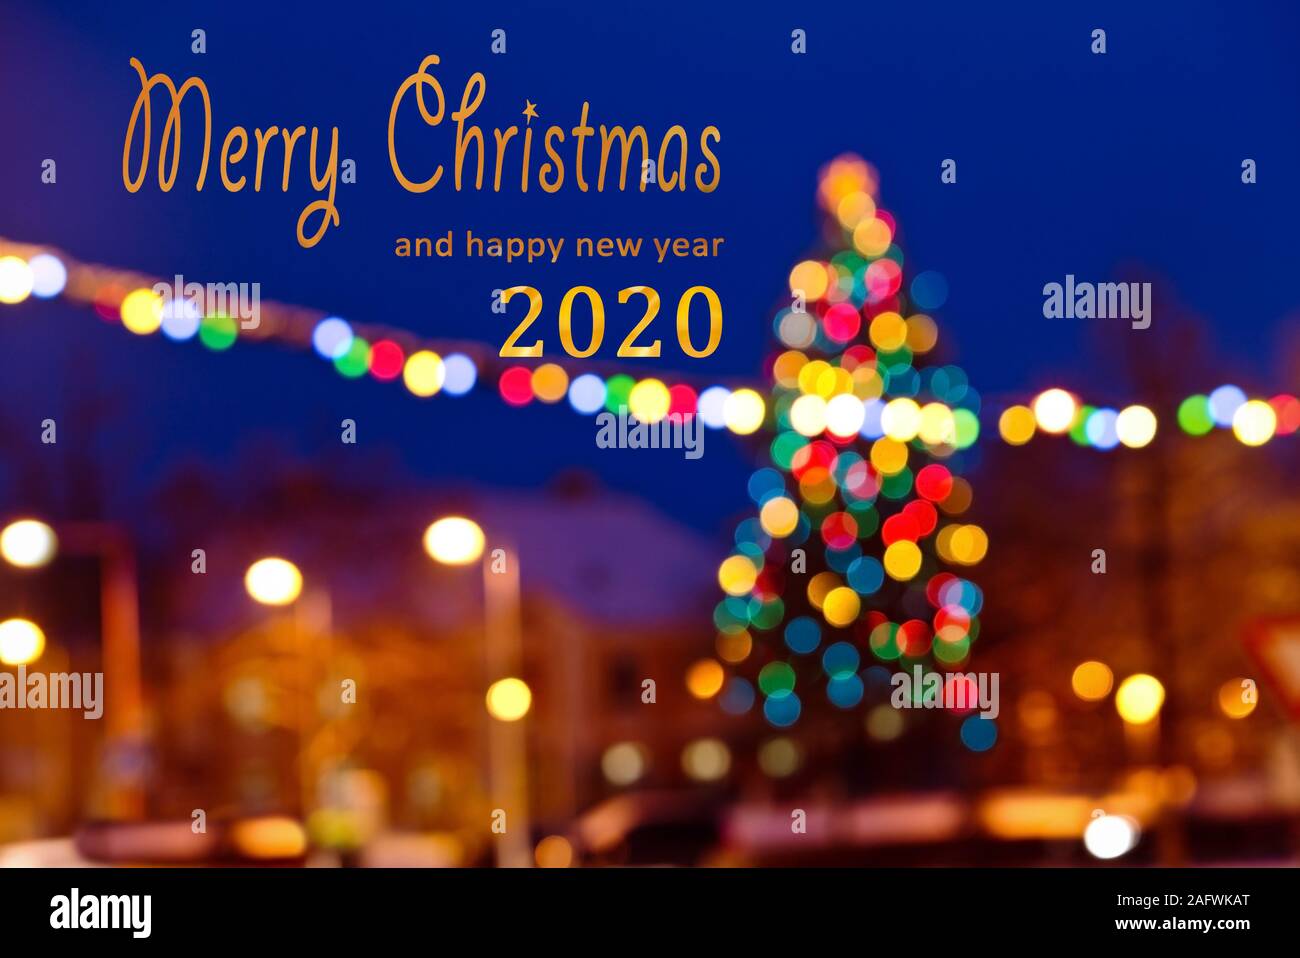 Christmas Background with text Merry Christmas 2020 Stock Photo